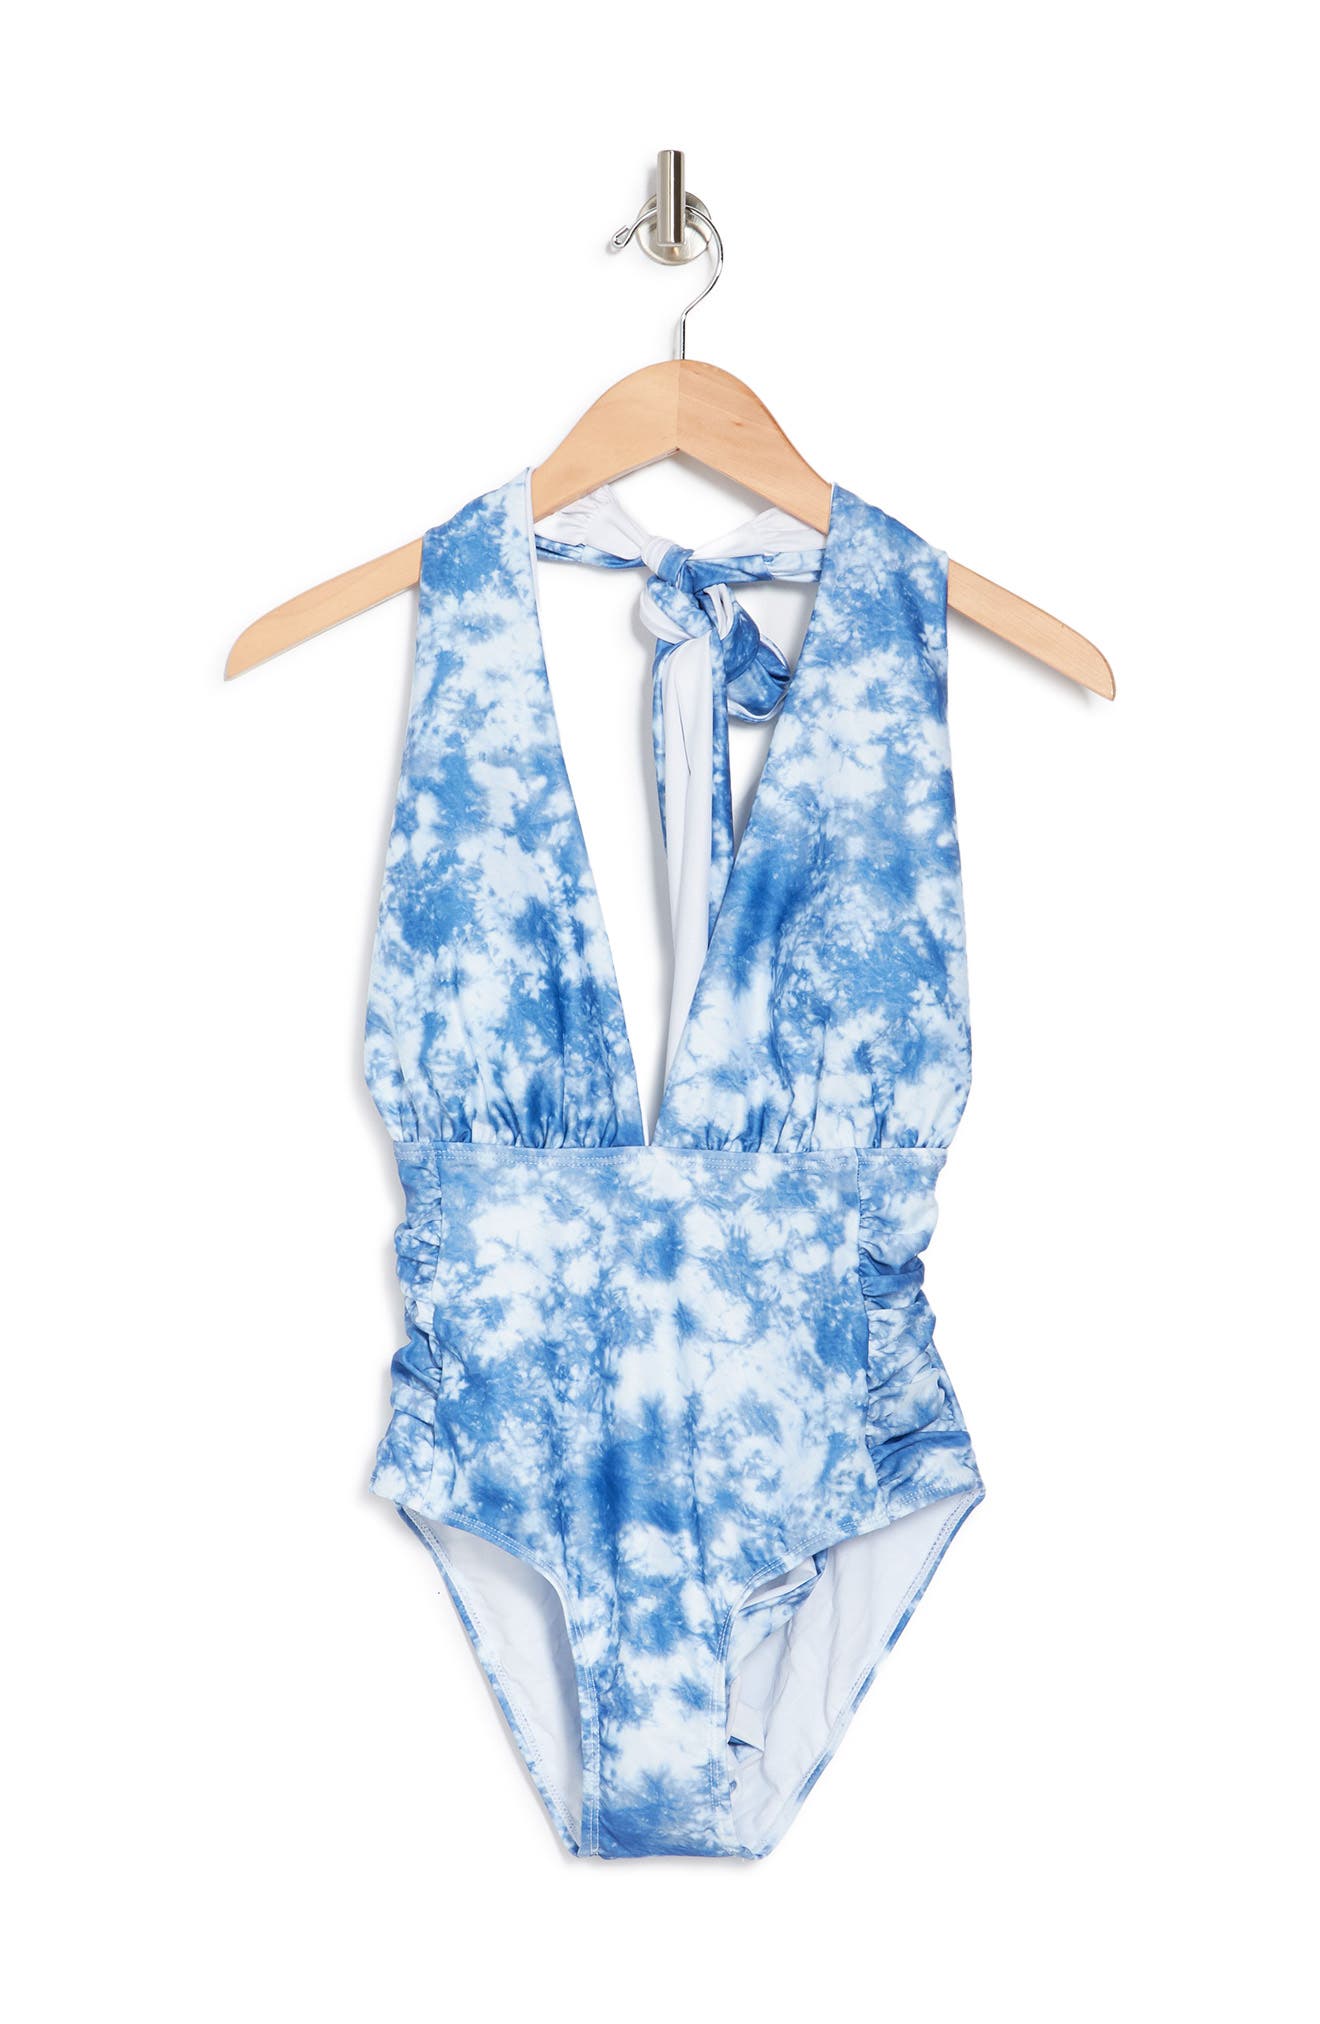 Nicole Miller Convertible One-piece Swimsuit In Tie Dye Moment